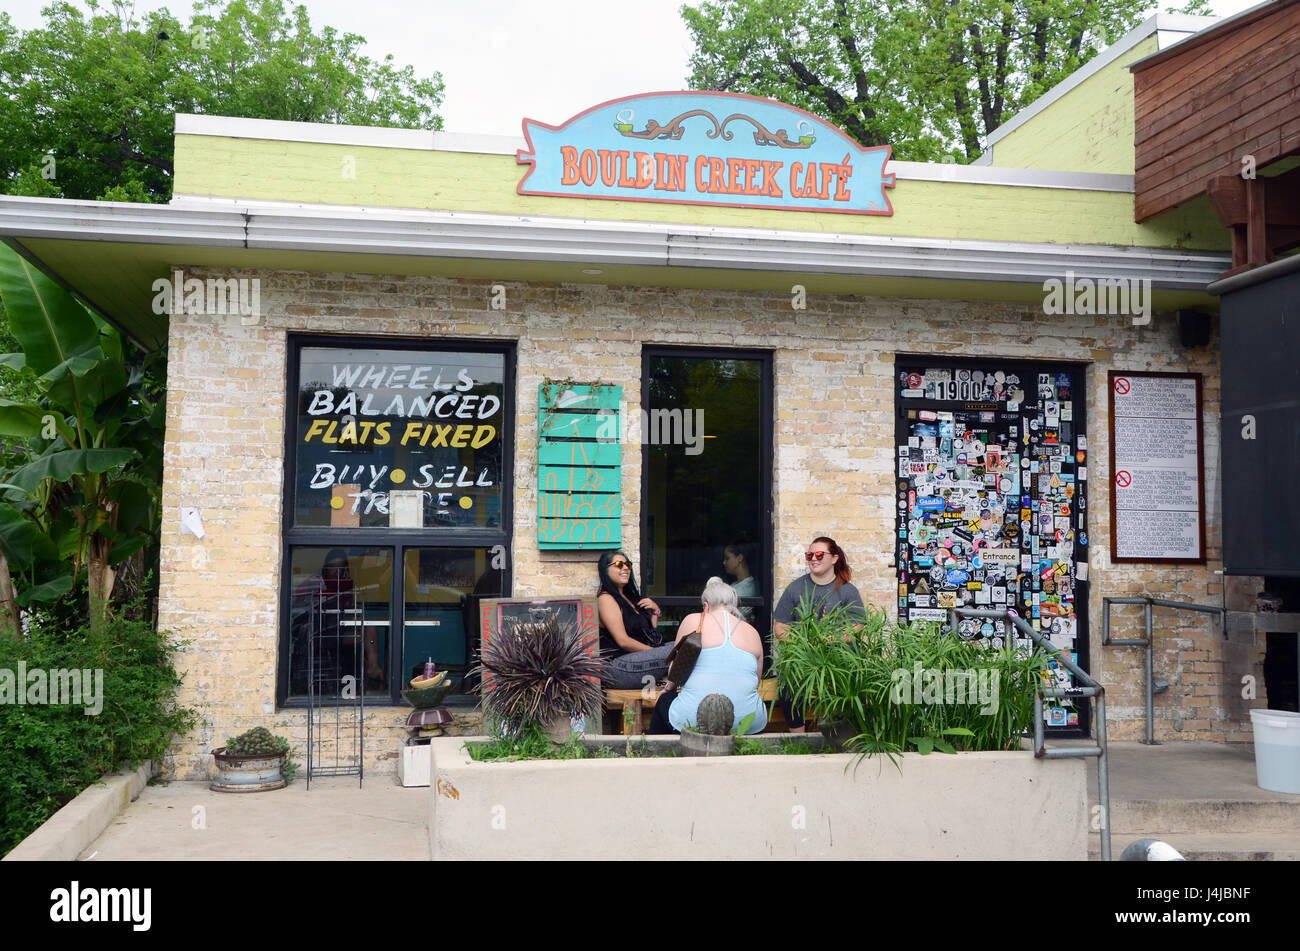 Exterior of the Bouldin Creek Cafe in Austin, Texas, hipster bar and cafe serving vegetarian and vegan food, with people waiting for a table Stock Photo